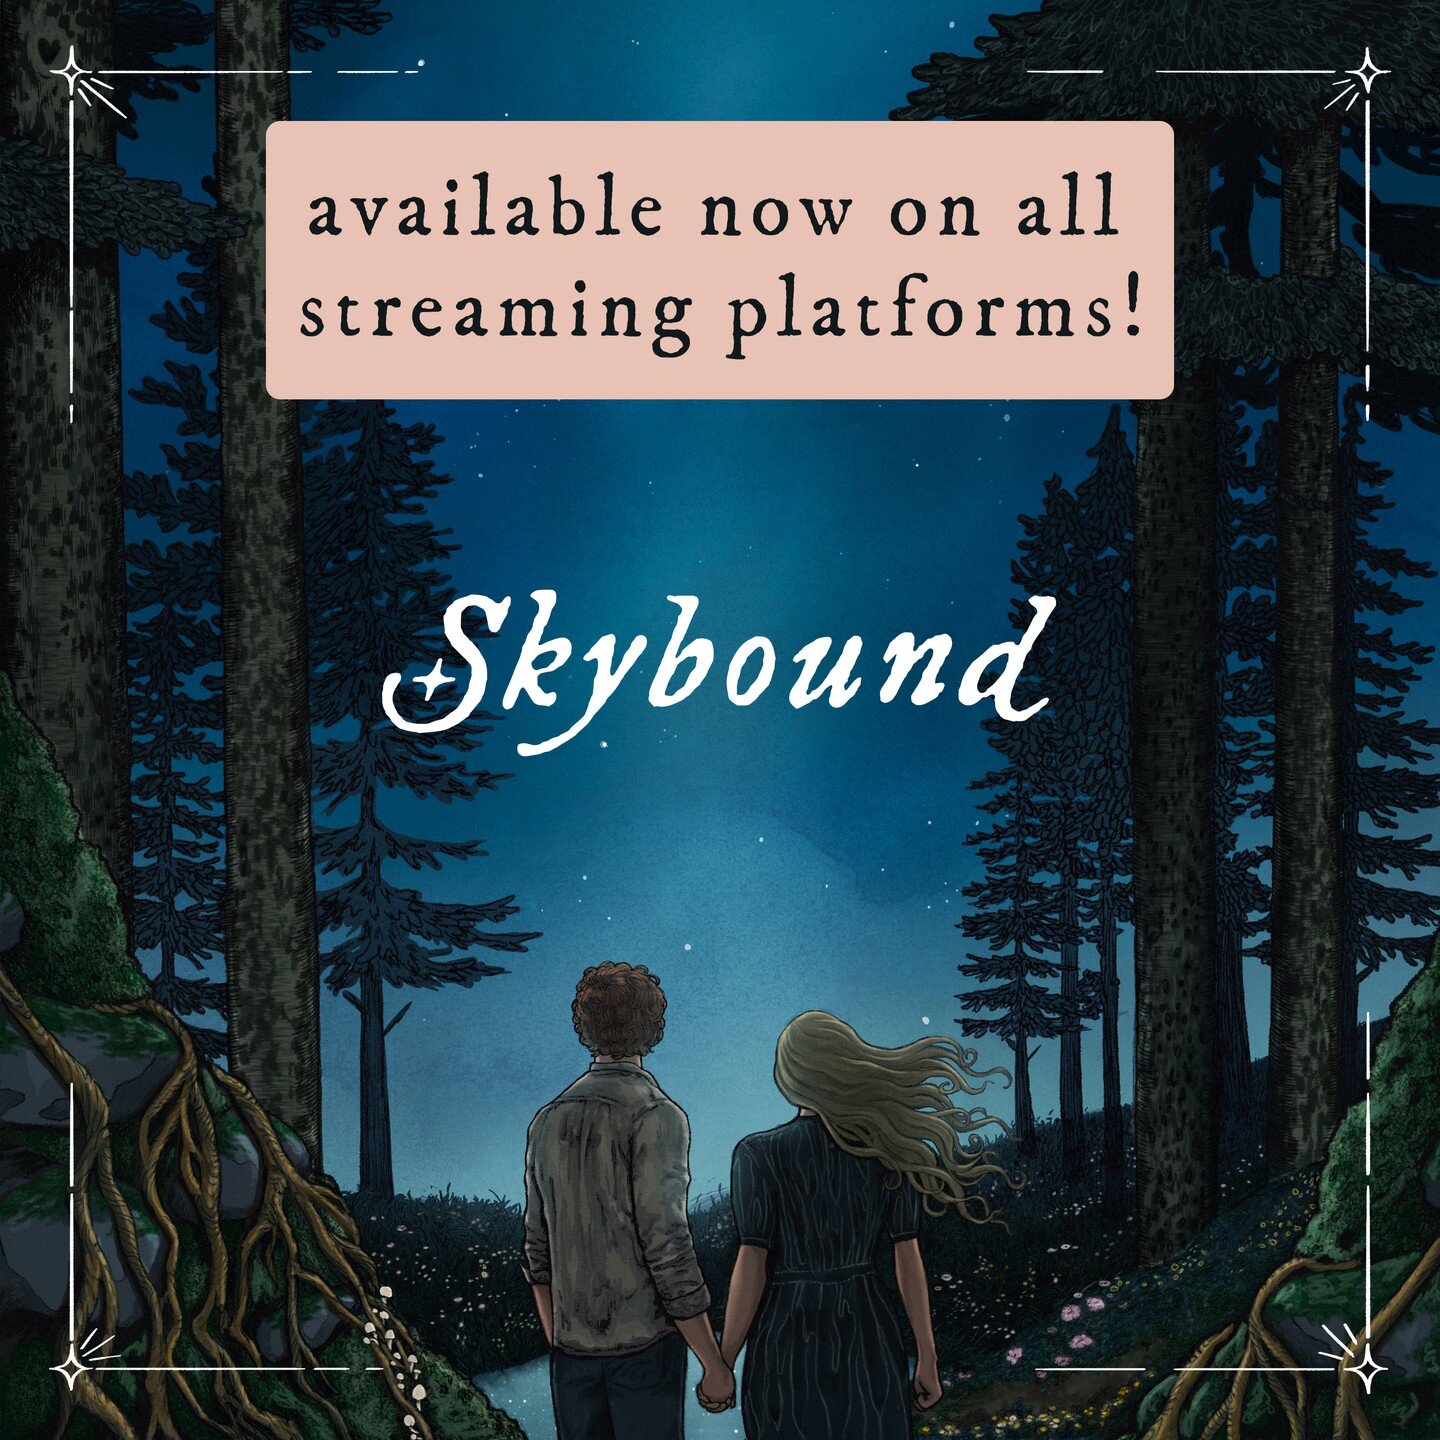 Skybound is finally out in the world! It's been quite a process to get to this point, but it's been so worth it to hear these songs recorded this way. Please support new music by listening to this album!

I have been so busy with last minute tasks le